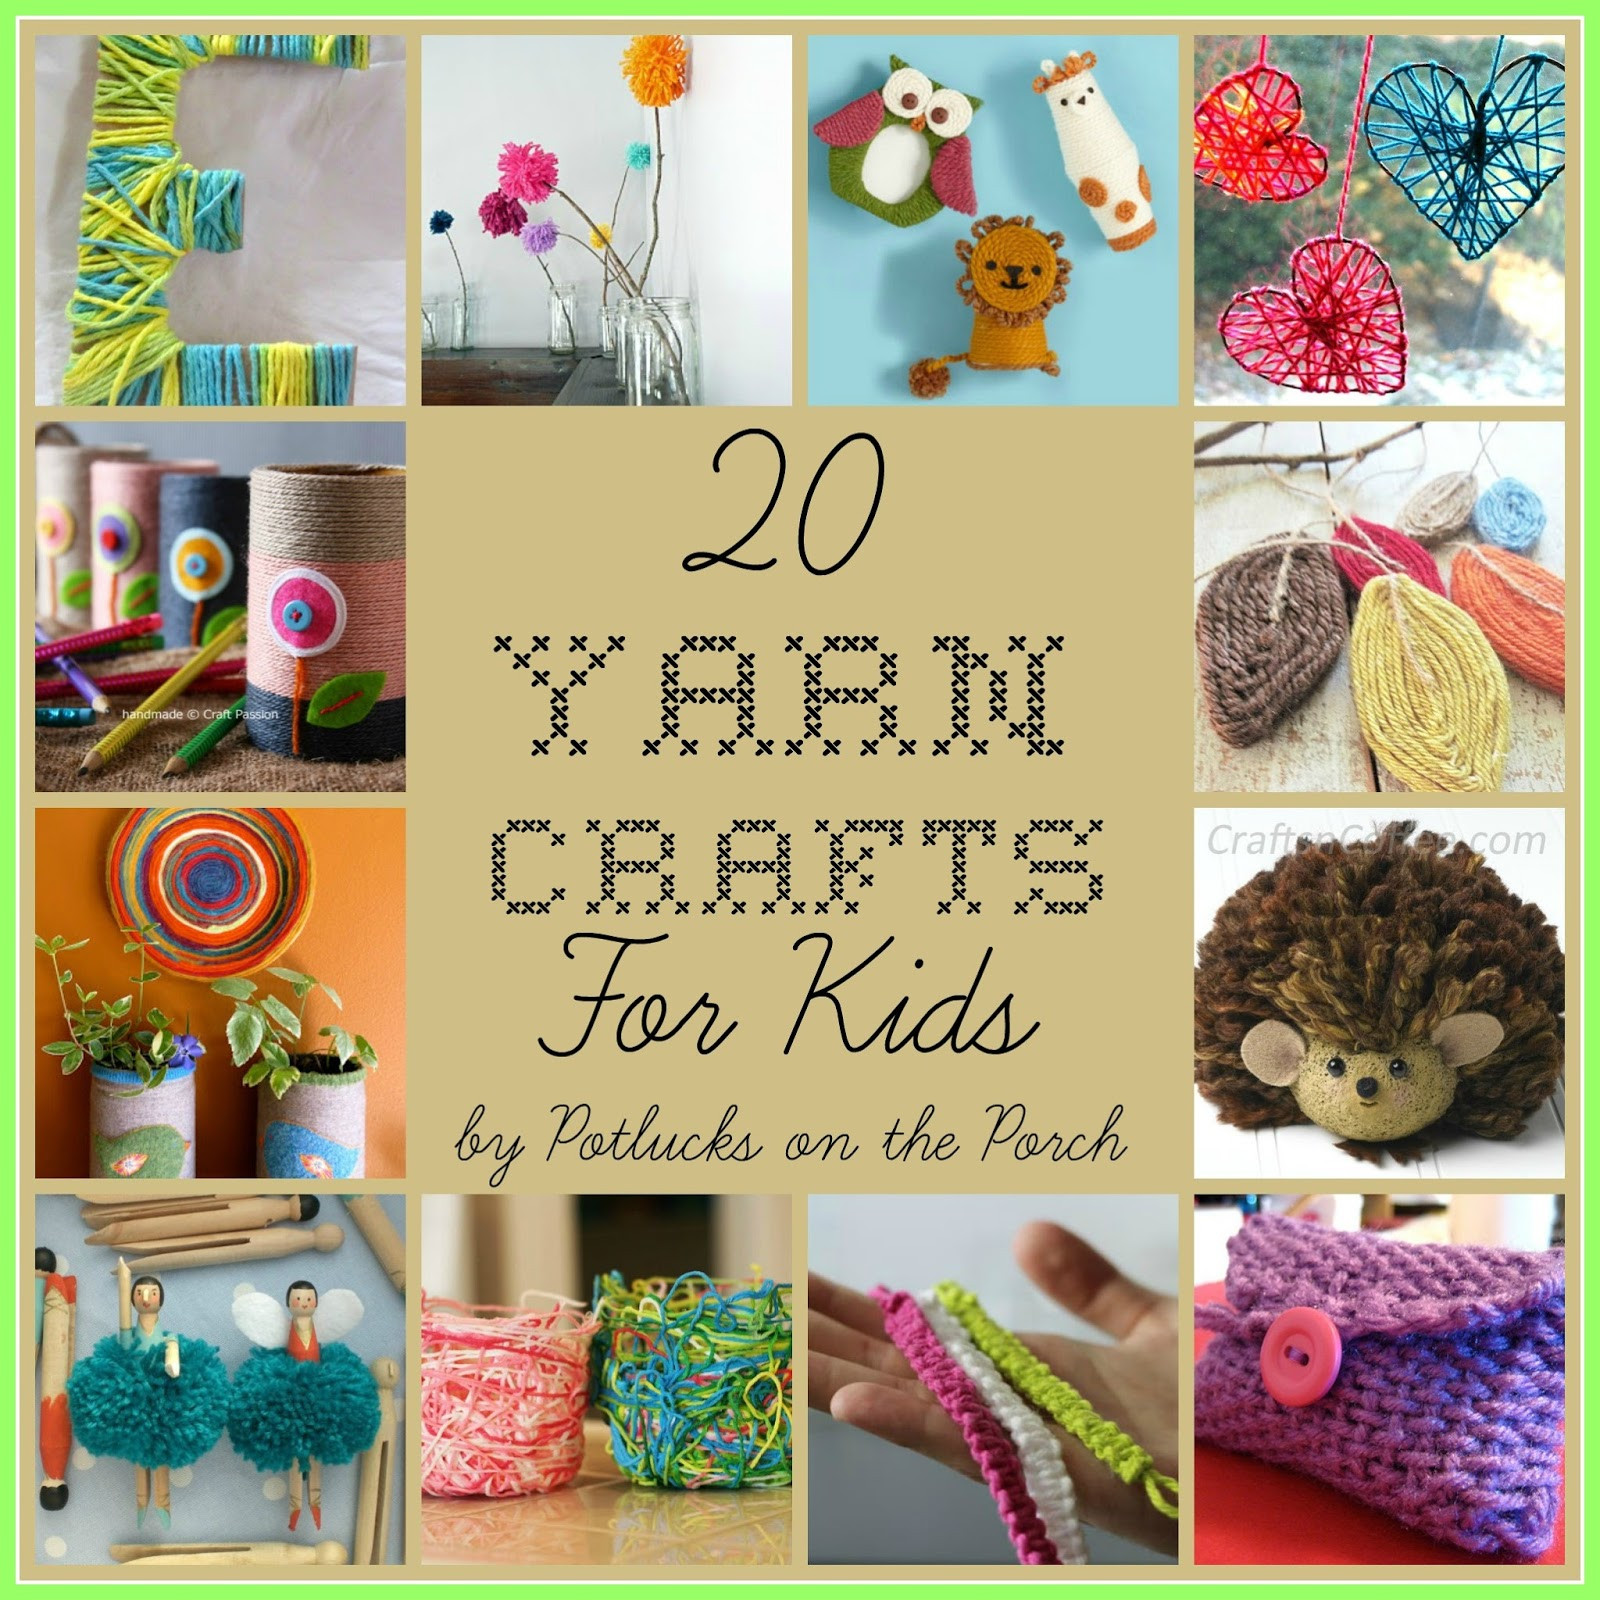 Yarn Crafts For Kids
 Potlucks on the Porch 20 Yarn Crafts for Kids